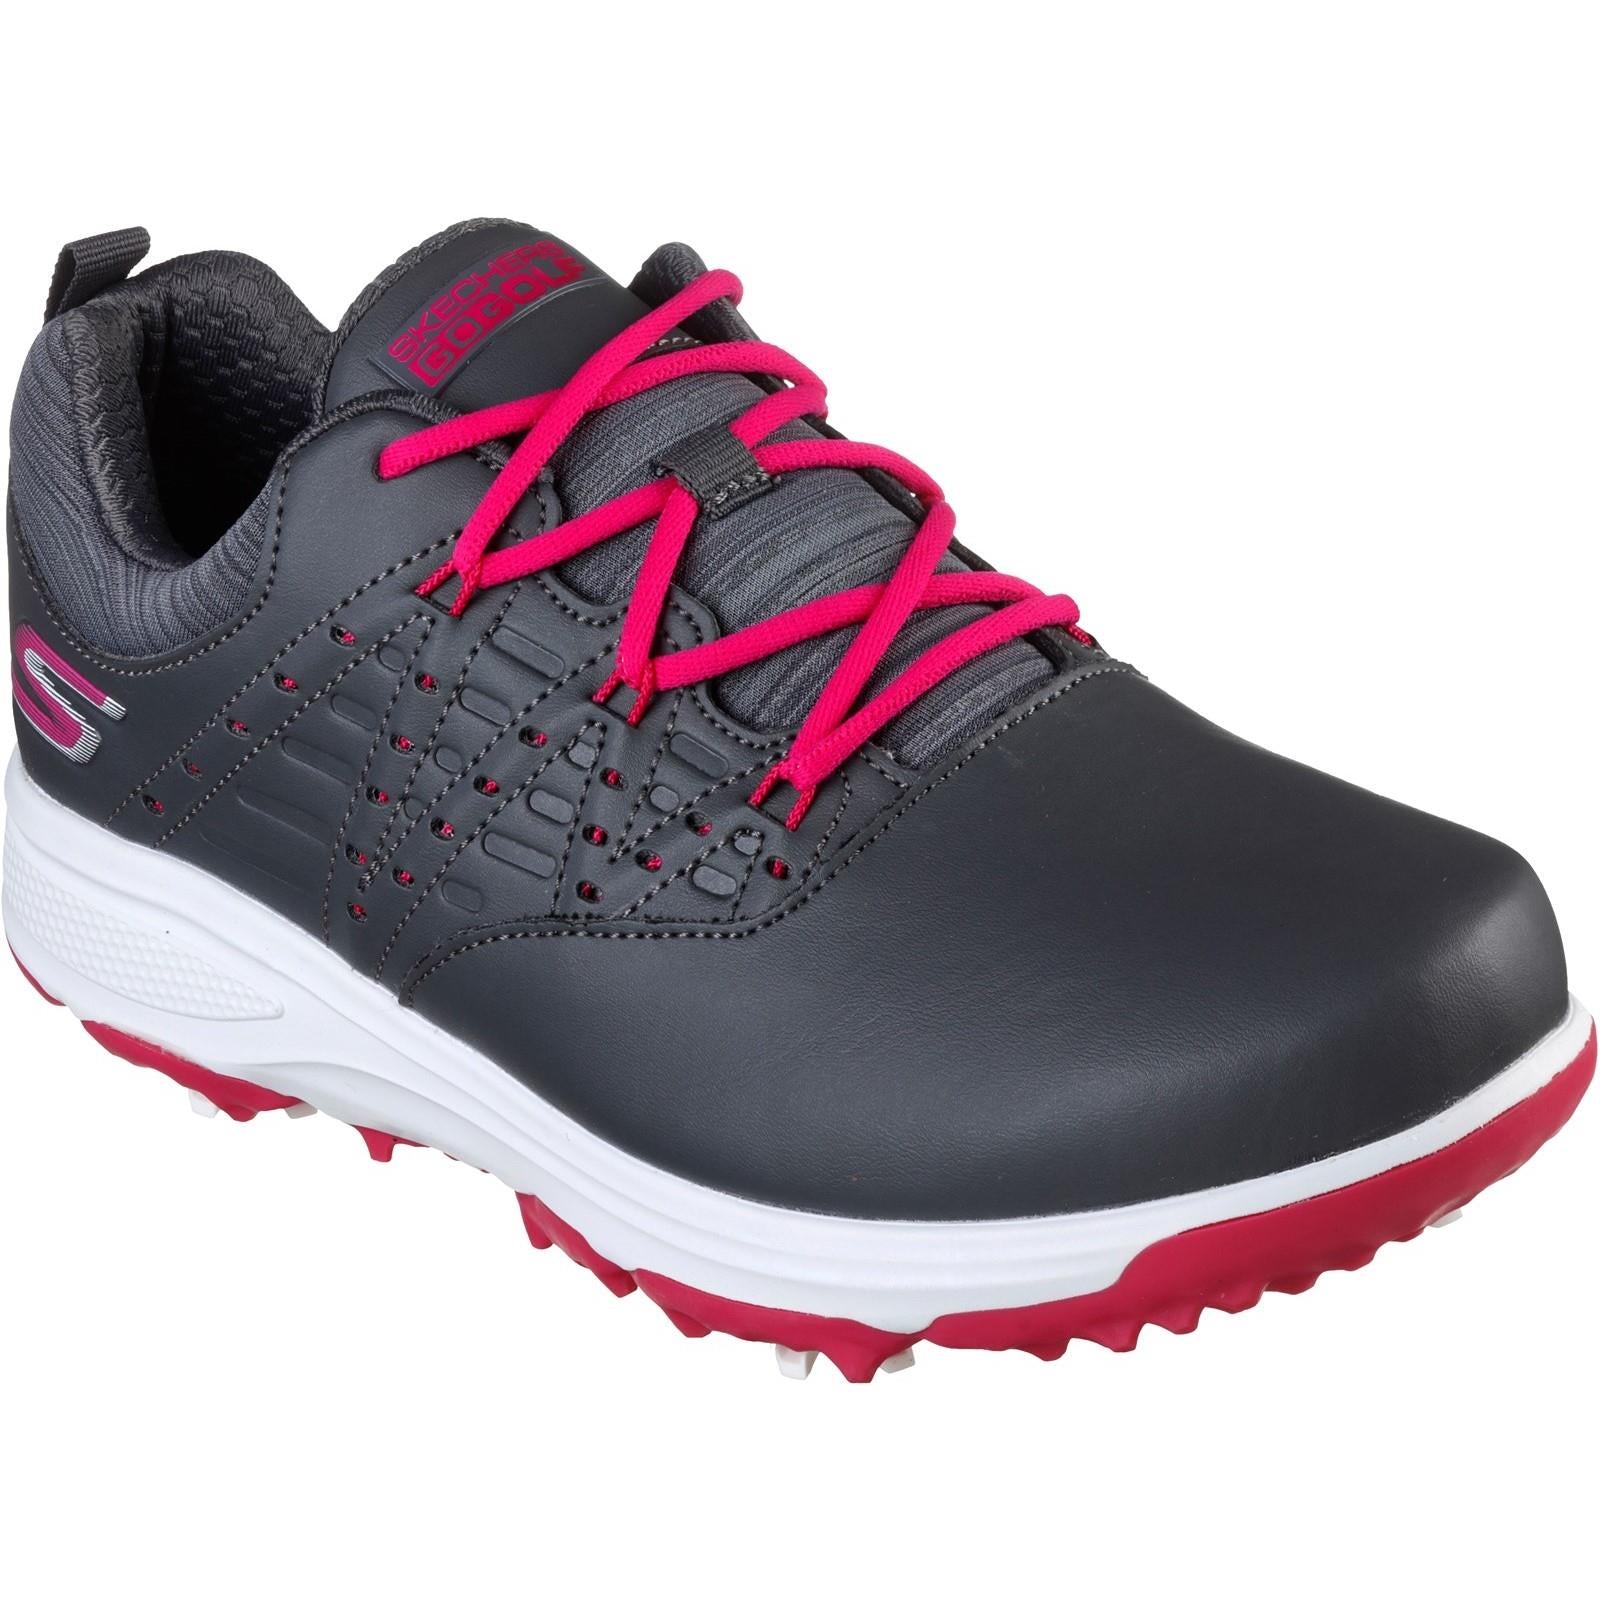 Skechers Go Golf Pro V.2 ladies grey/pink softspikes waterproof trainers shoes